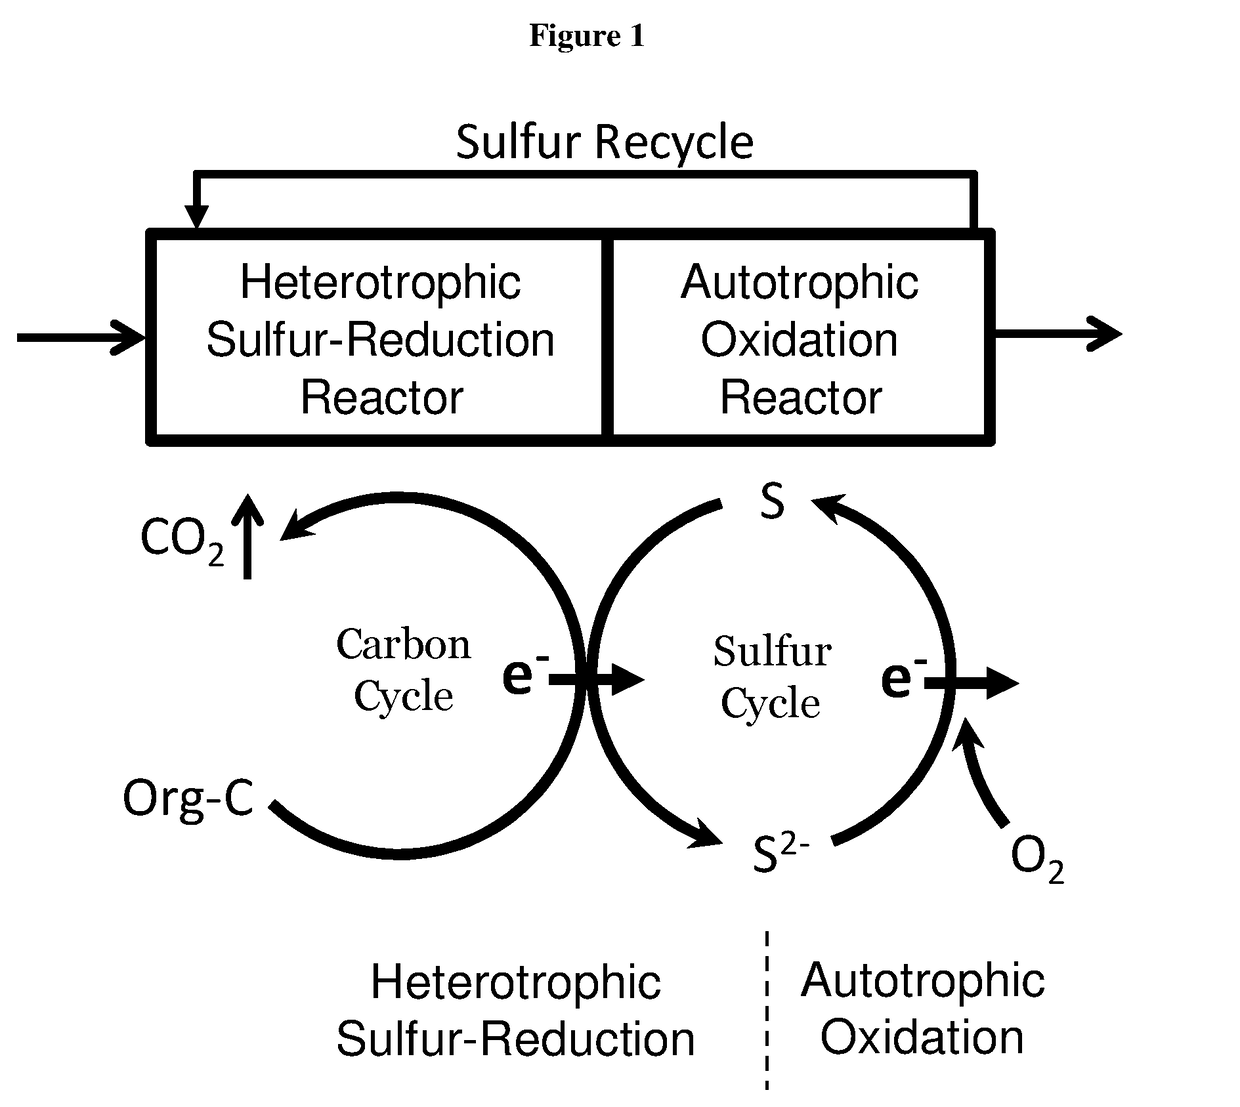 Internal sulfur cycling sani (isc-sani) process for biological wastewater treatment